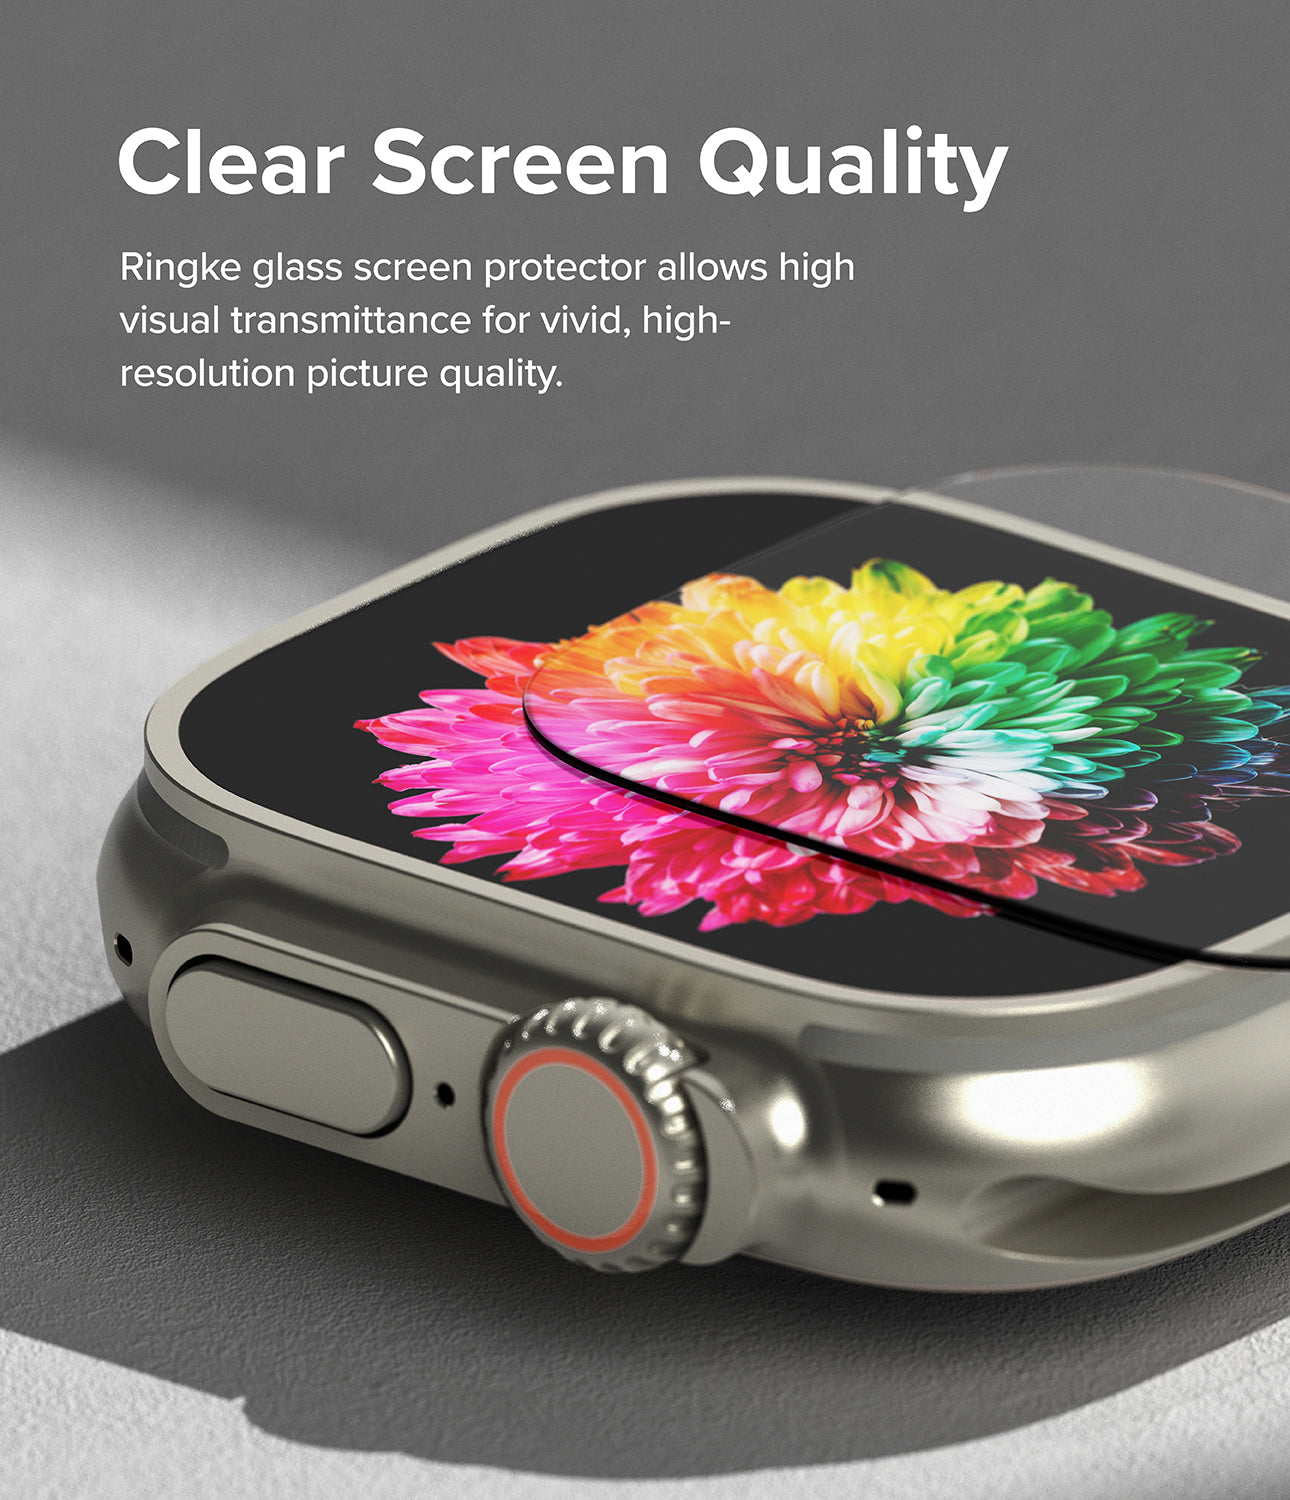 Clear Screen Quality - Ringke glass screen protector allows high visual transmittance for vivid, high-resolution picture quality.